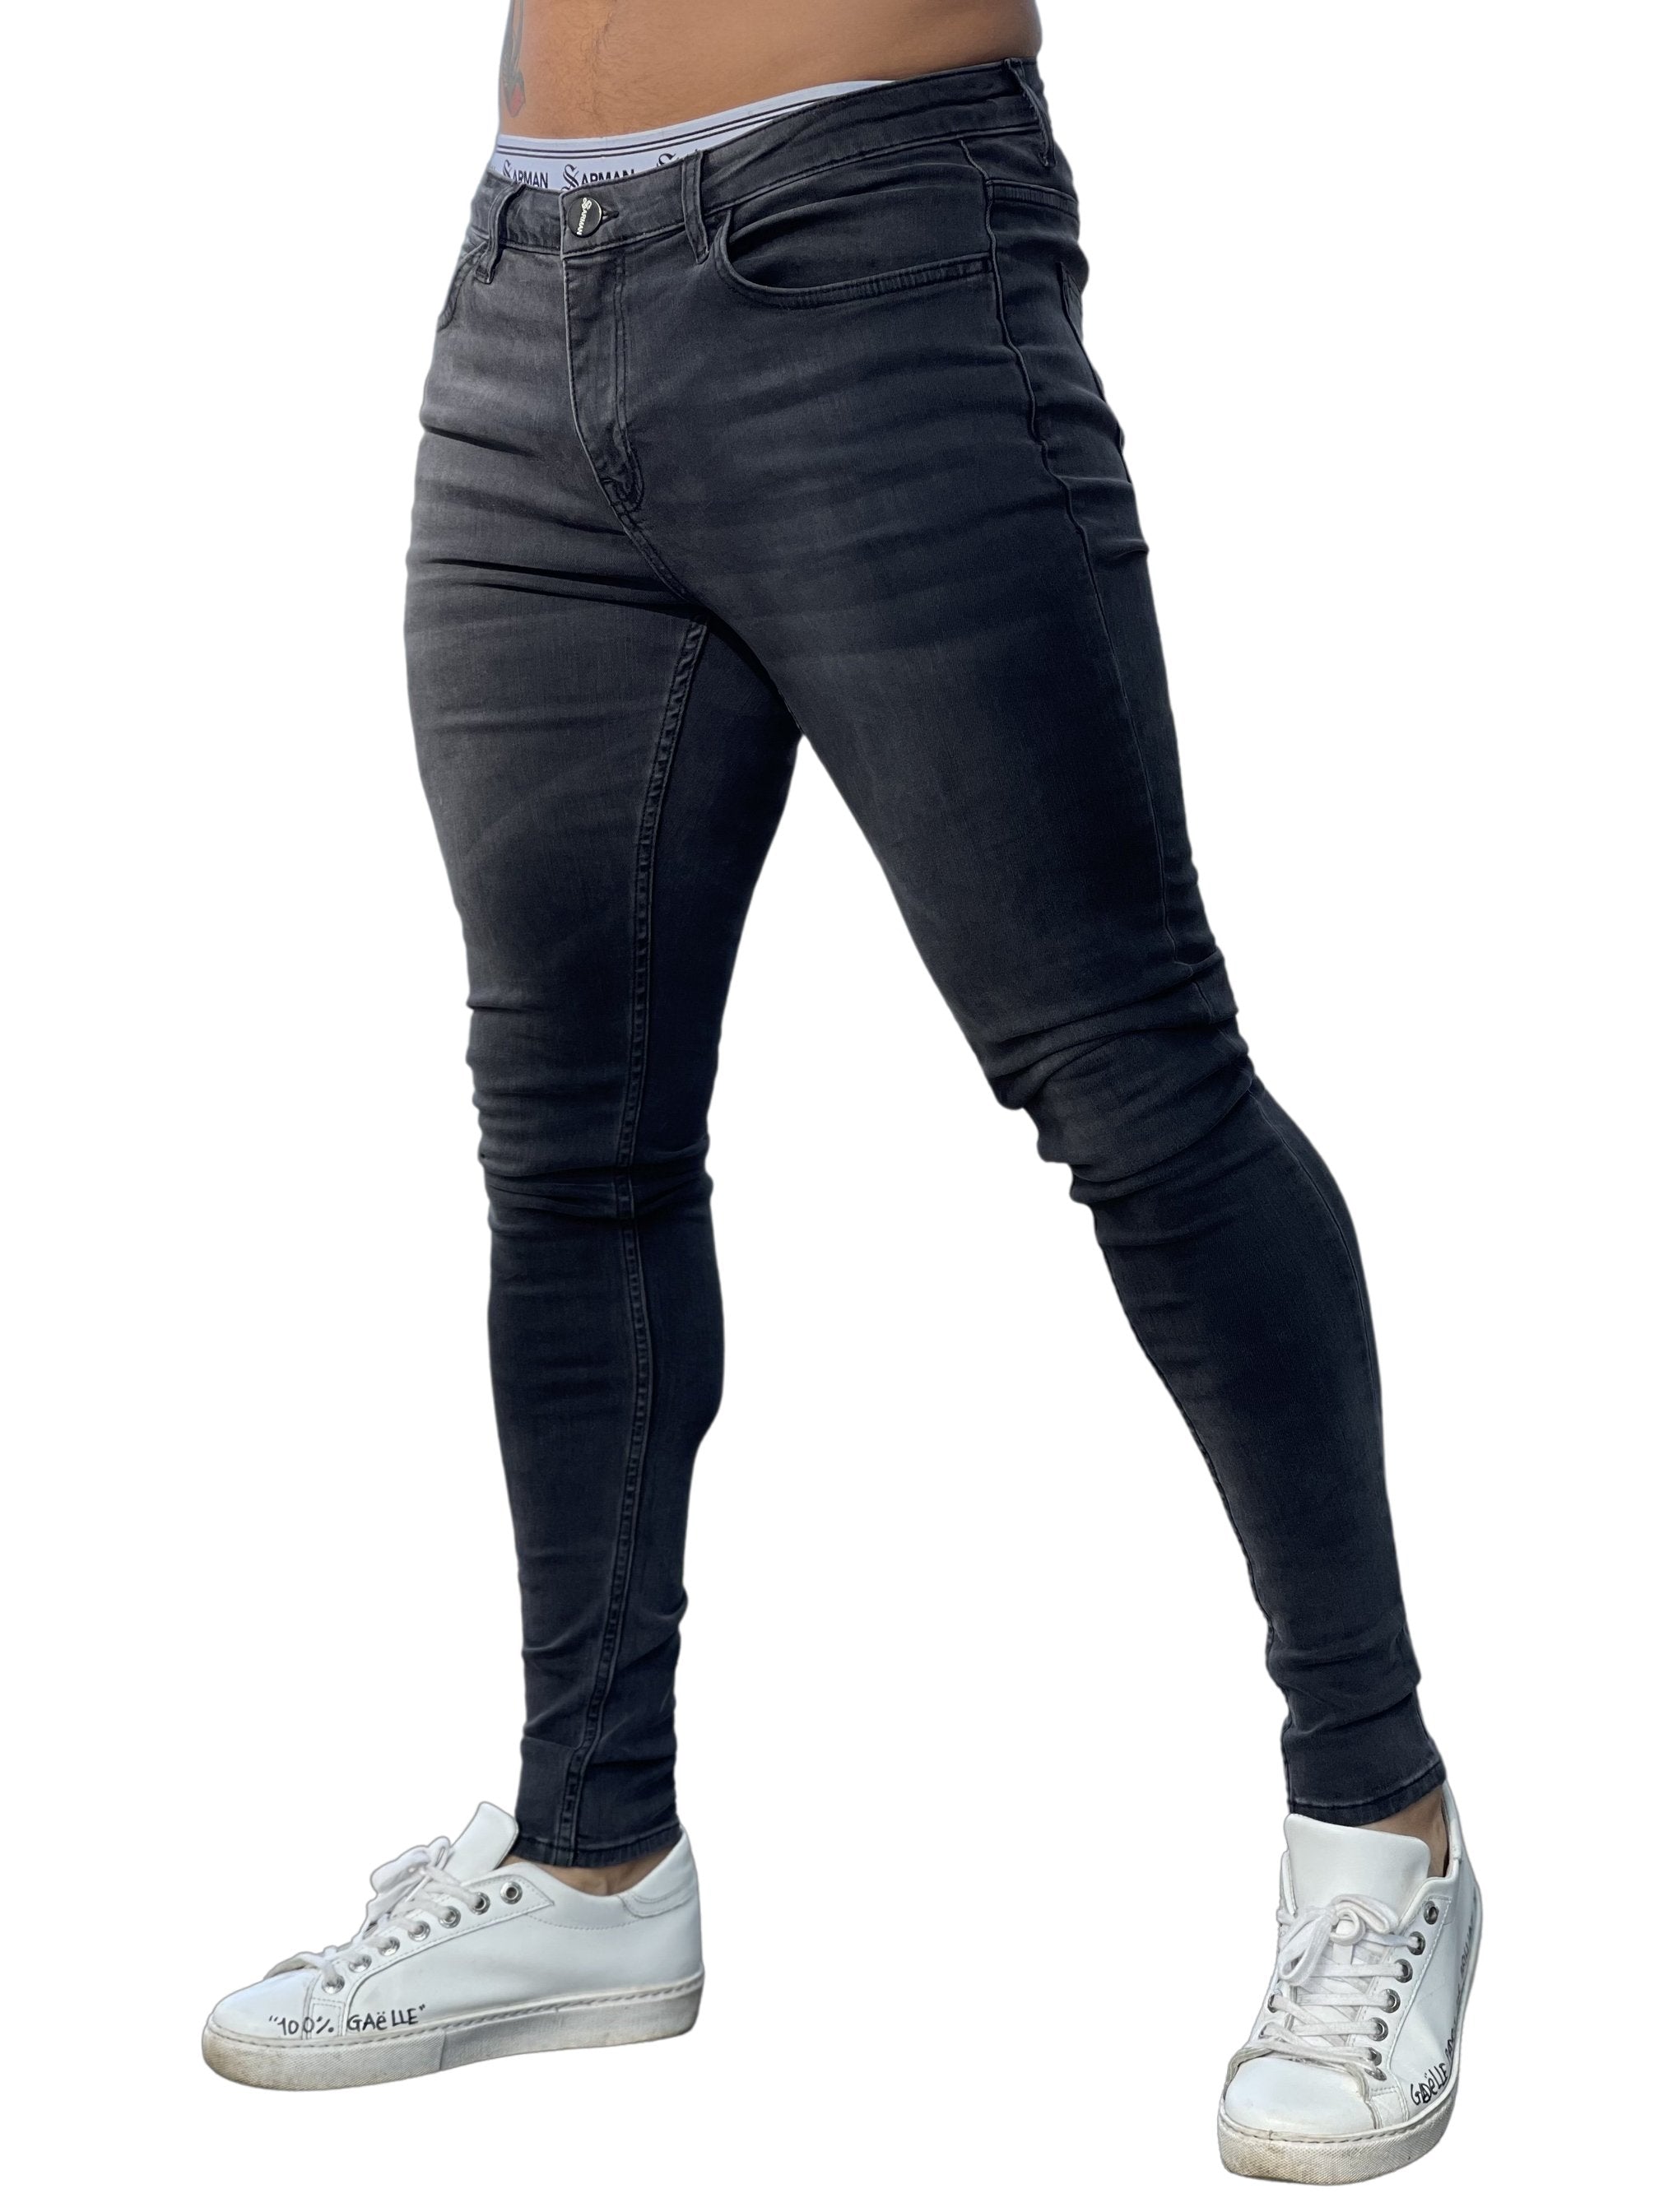 Survival - Grey Skinny Jeans for Men – Sarman Fashion - Wholesale Clothing  Fashion Brand for Men from Canada